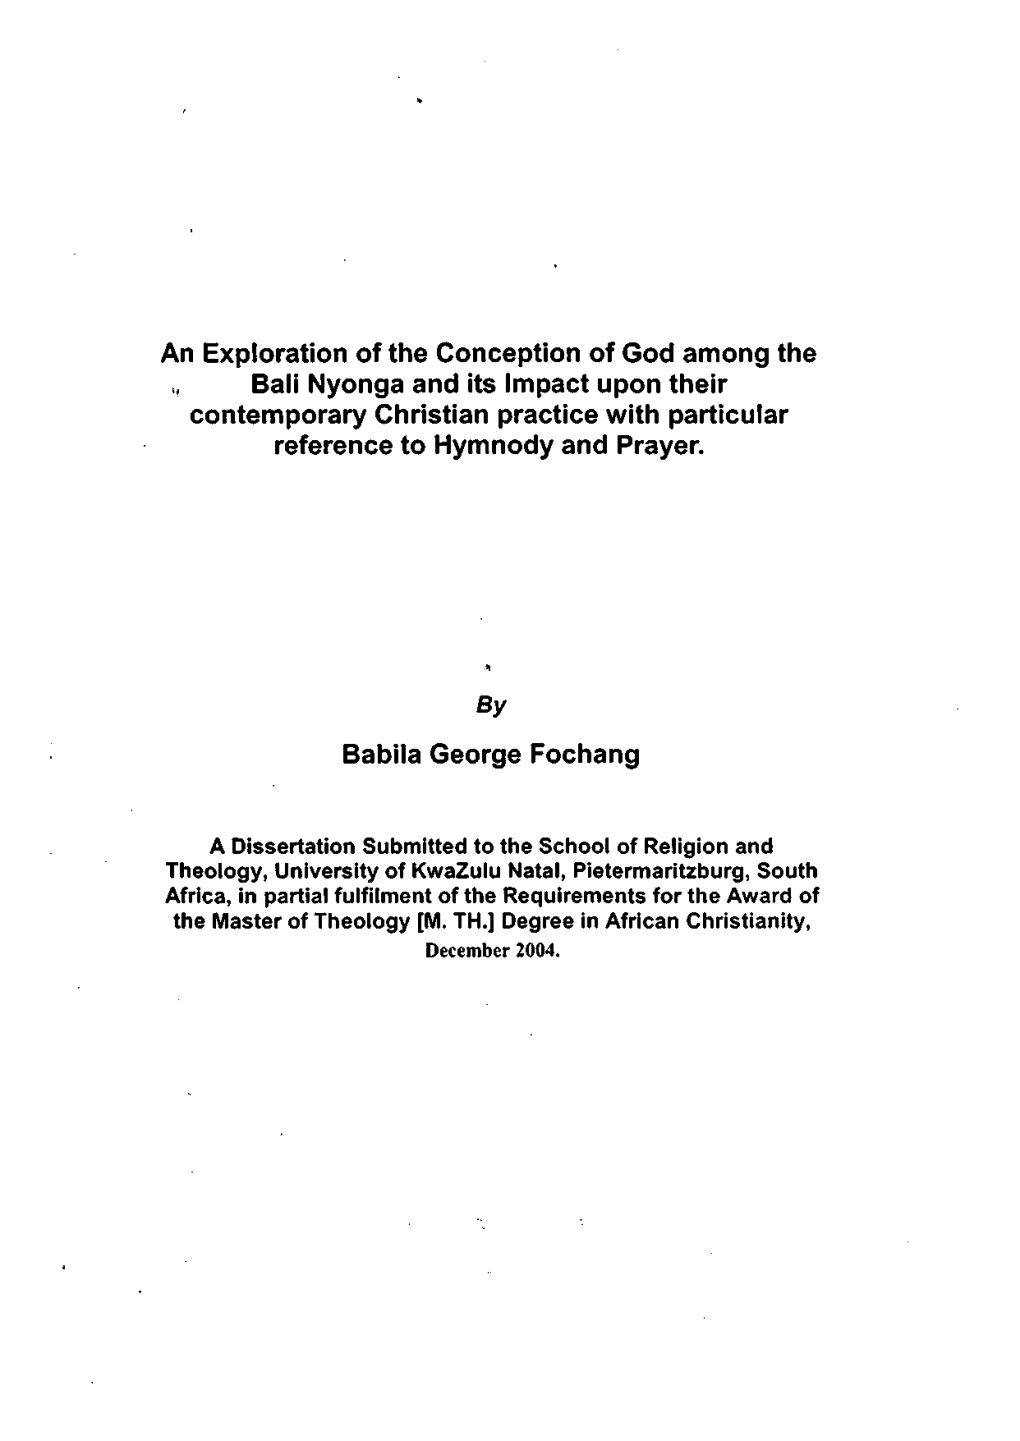 An Exploration of the Conception of God Among the Bali Nyonga and Its Impact Upon Their Contemporary Christian Practice With